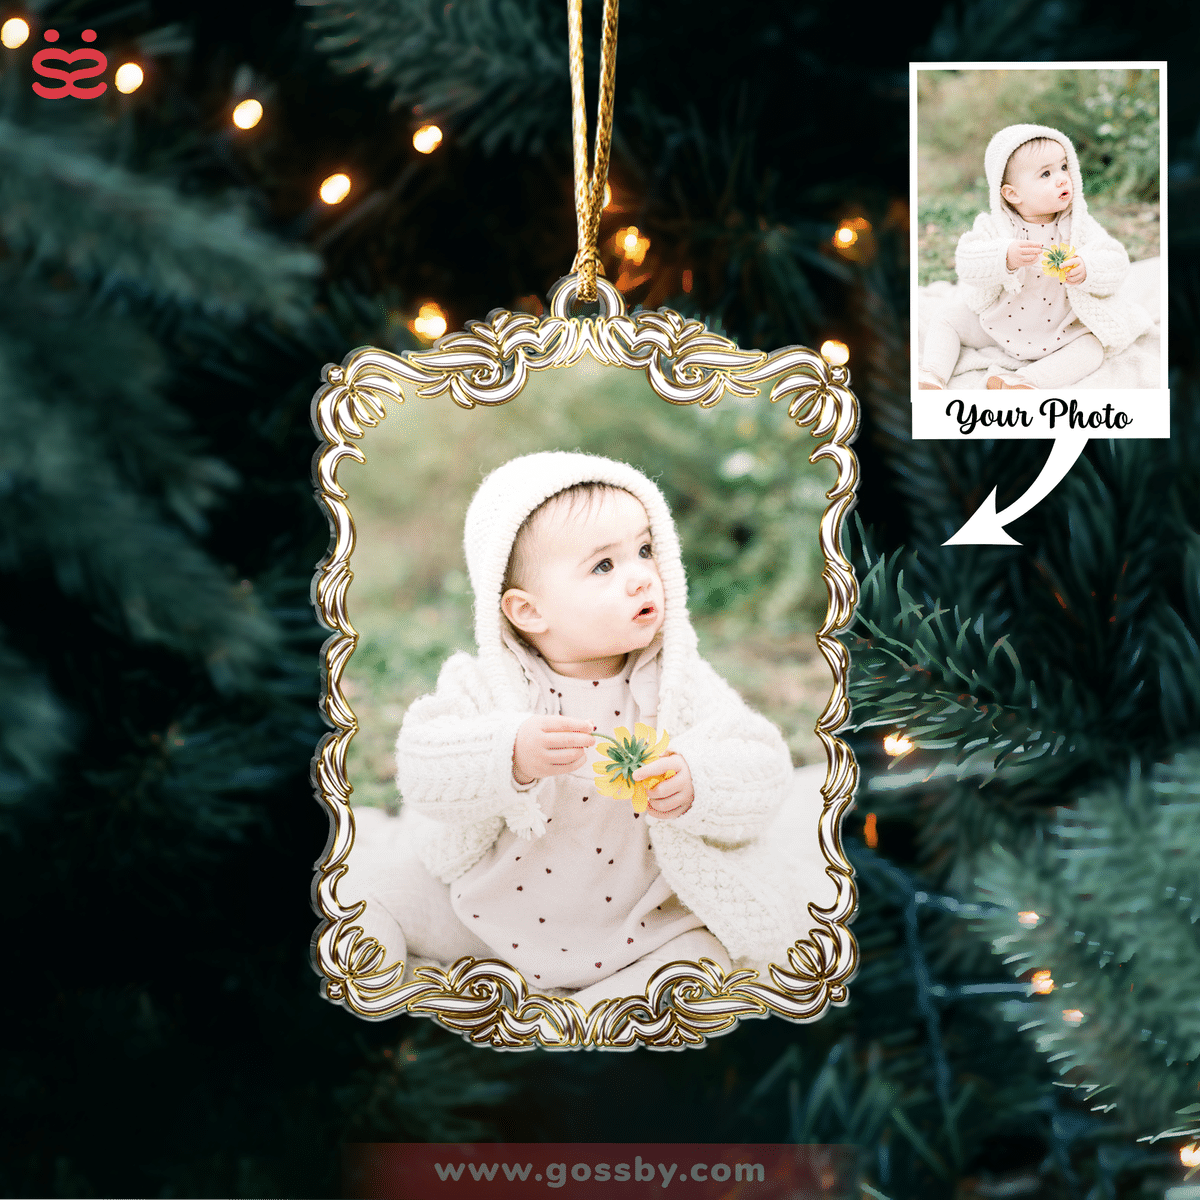 Xmas Ornament - Photo Frame Keepsake Ornament - Customized Your Photo Ornaments - Couple Photo Gifts, Christmas Gifts for Couple_1